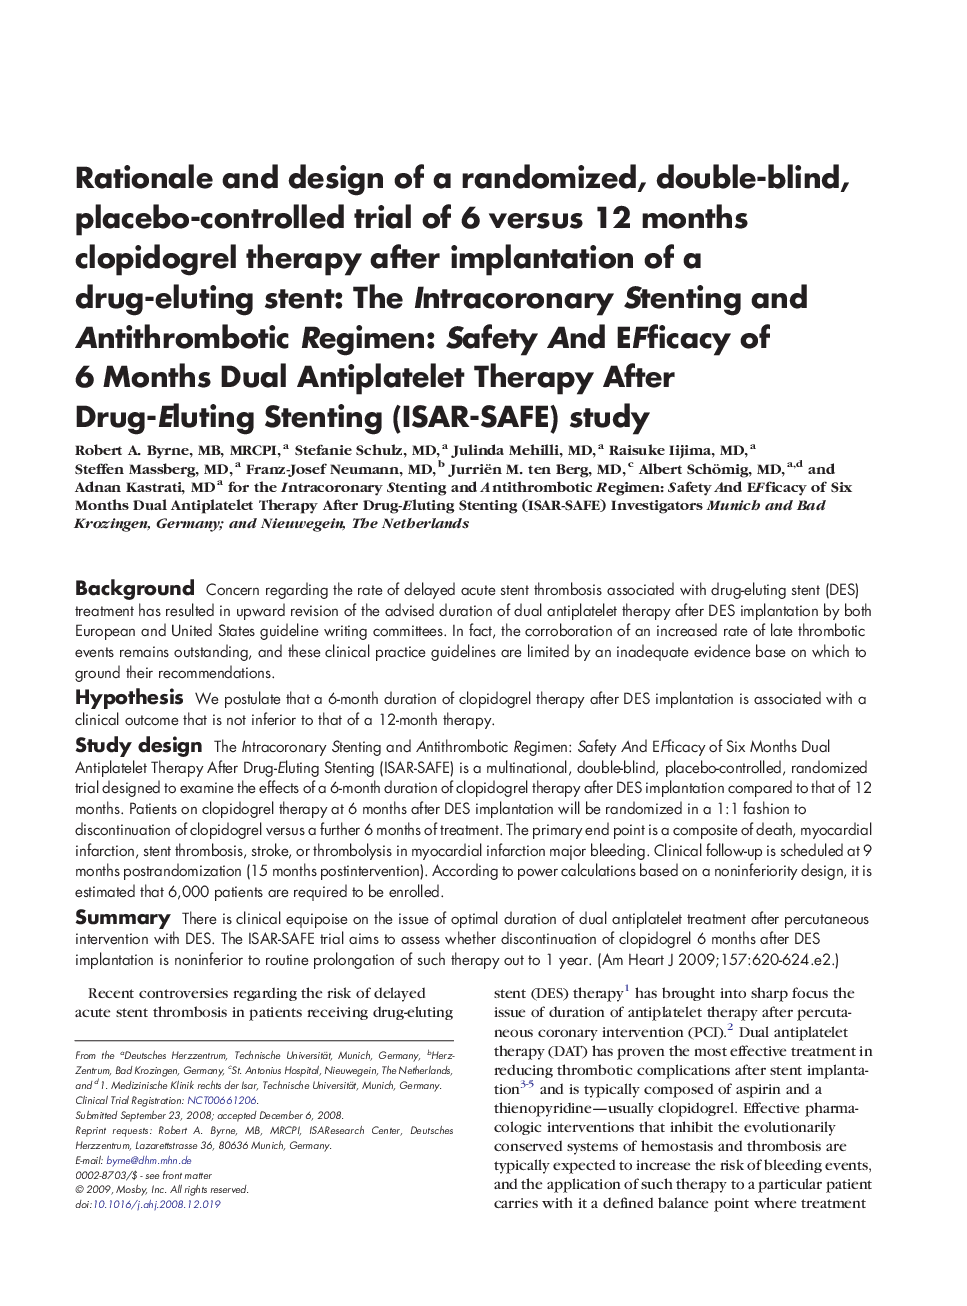 Rationale and design of a randomized, double-blind, placebo-controlled trial of 6 versus 12 months clopidogrel therapy after implantation of a drug-eluting stent: The Intracoronary Stenting and Antithrombotic Regimen: Safety And EFficacy of 6 Months Dual 